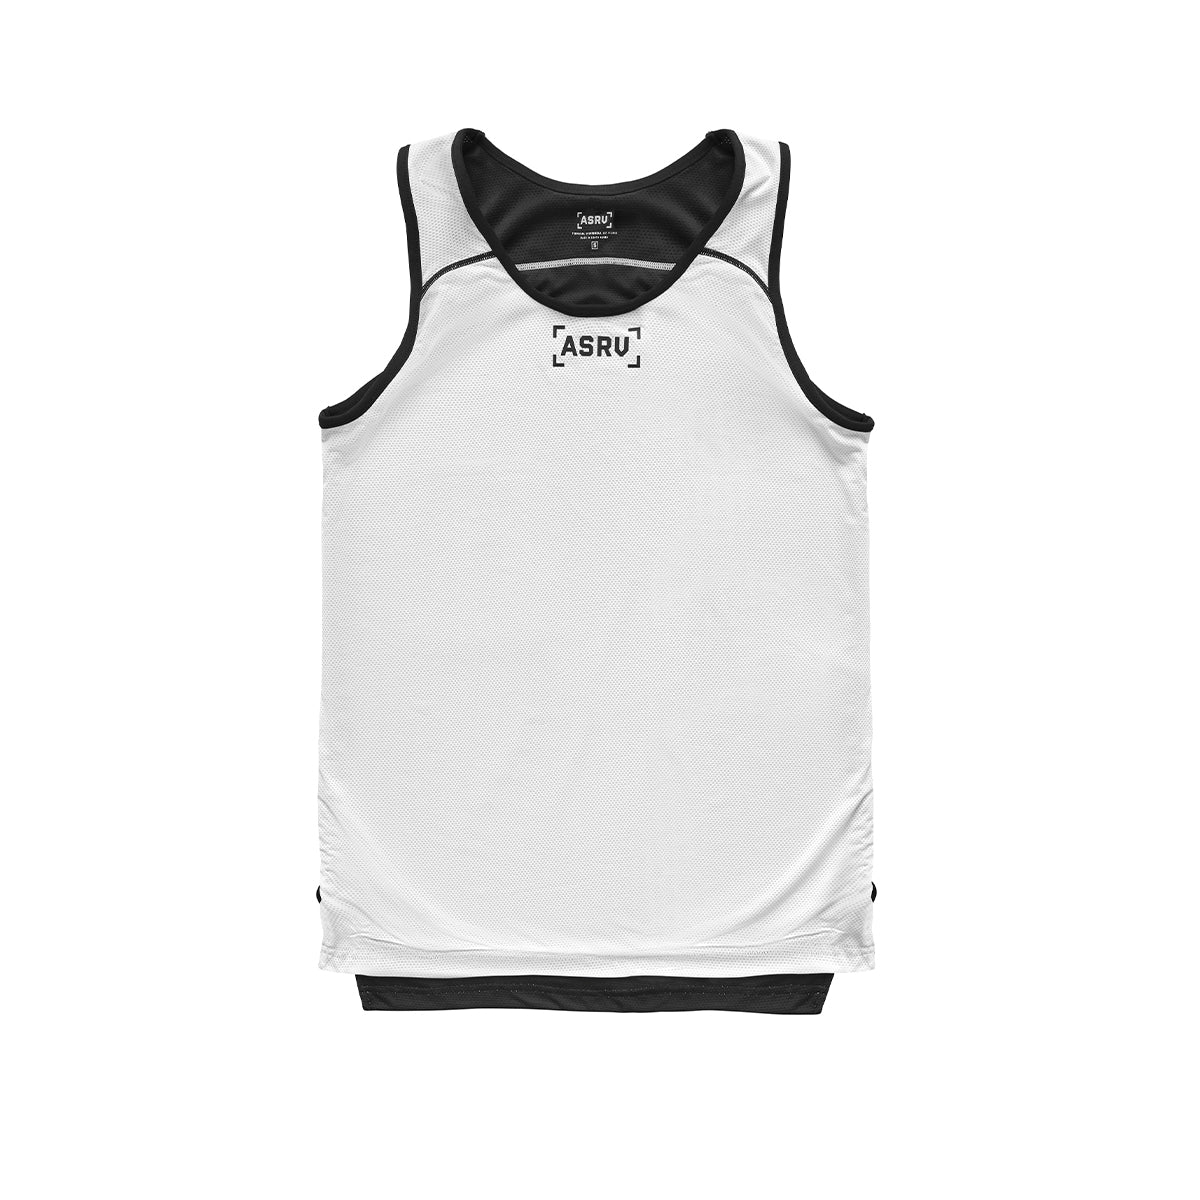 black and white reversible jersey